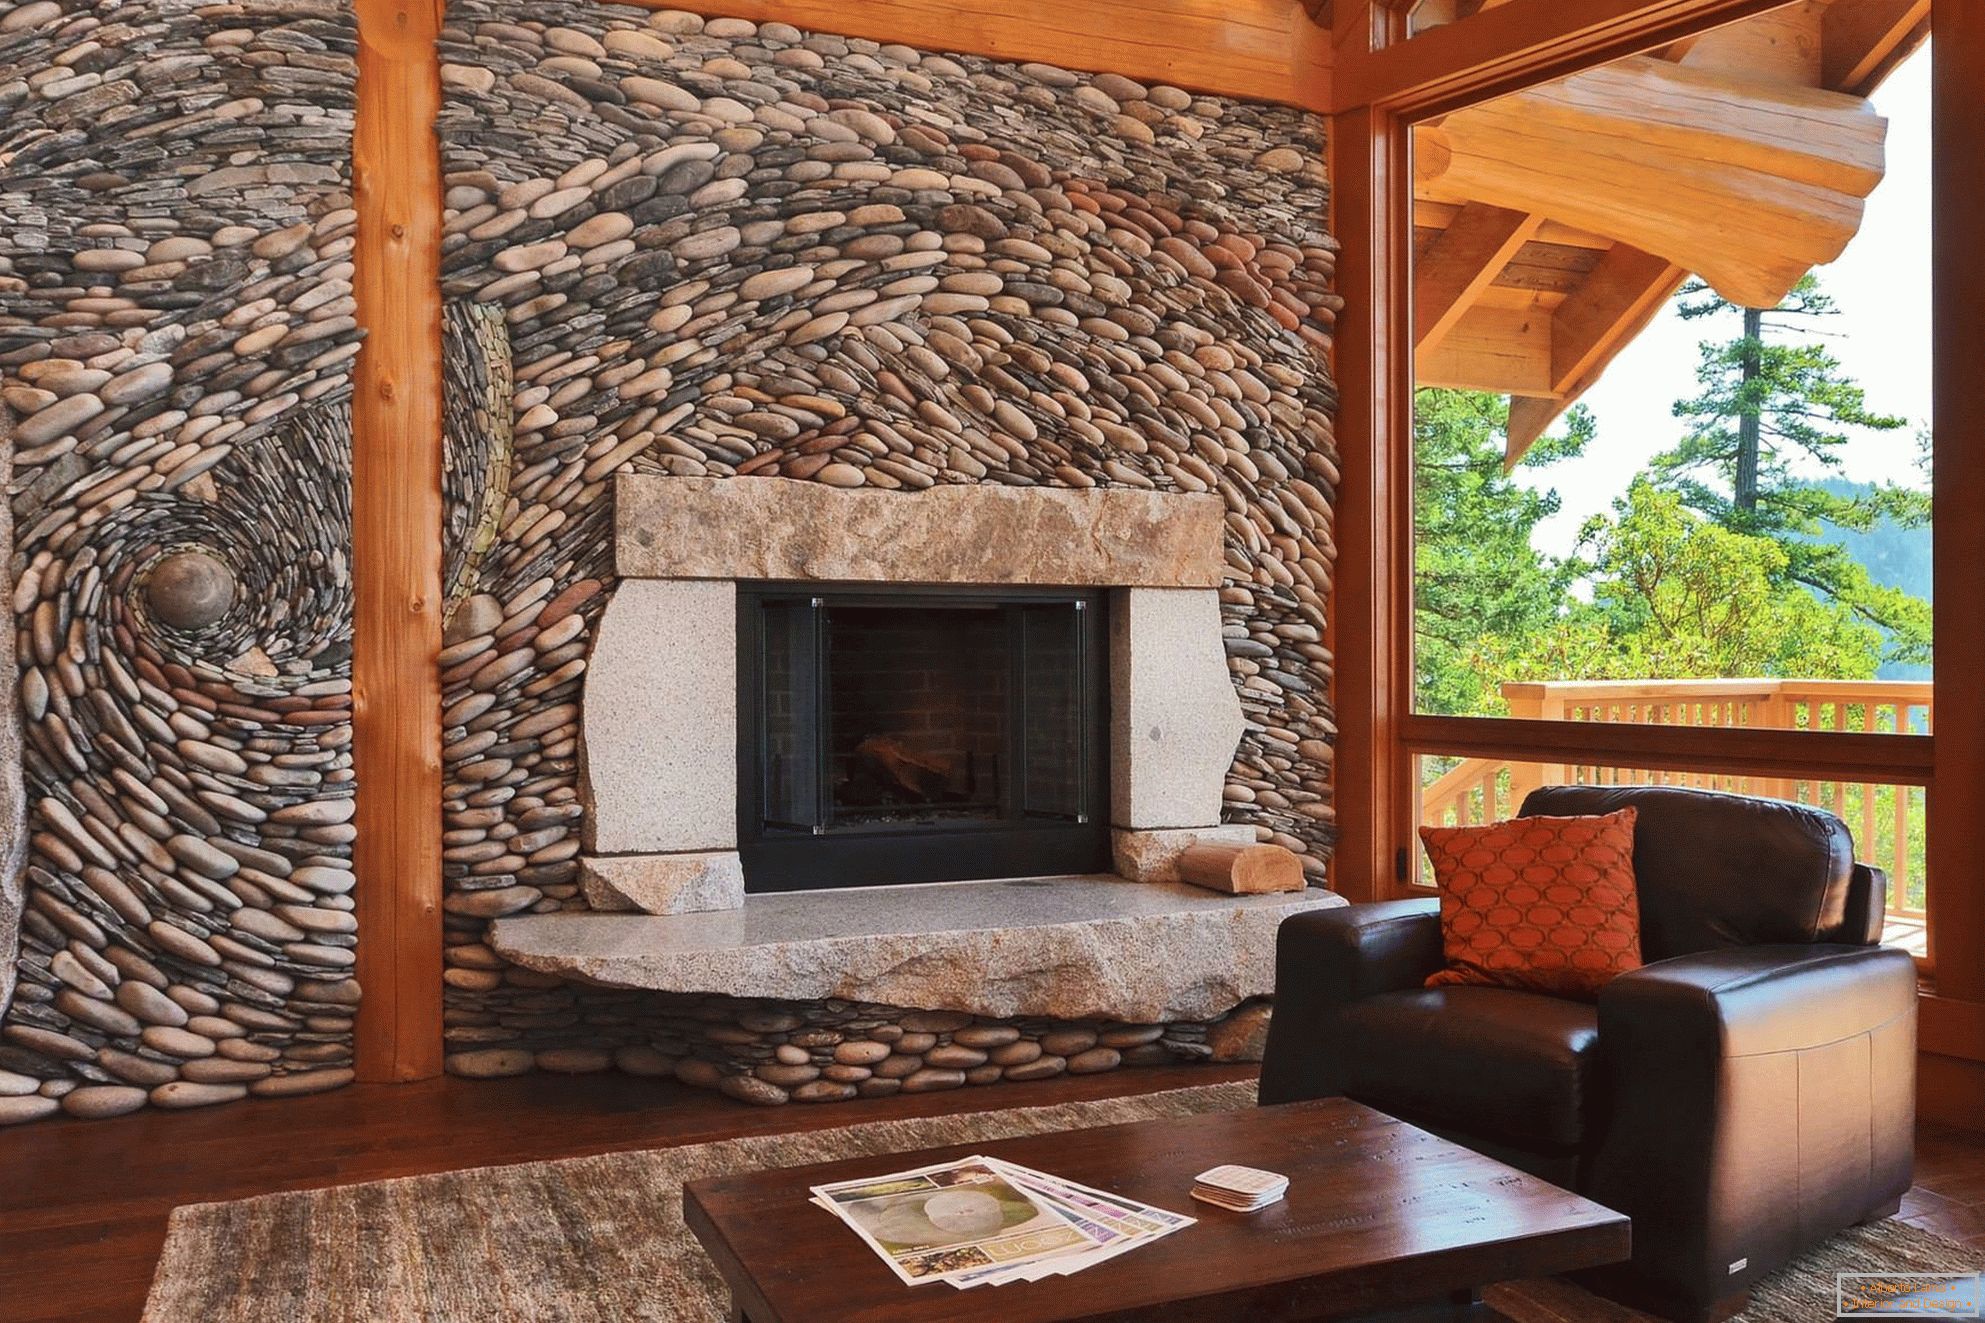 Decorative stone on the wall with a fireplace